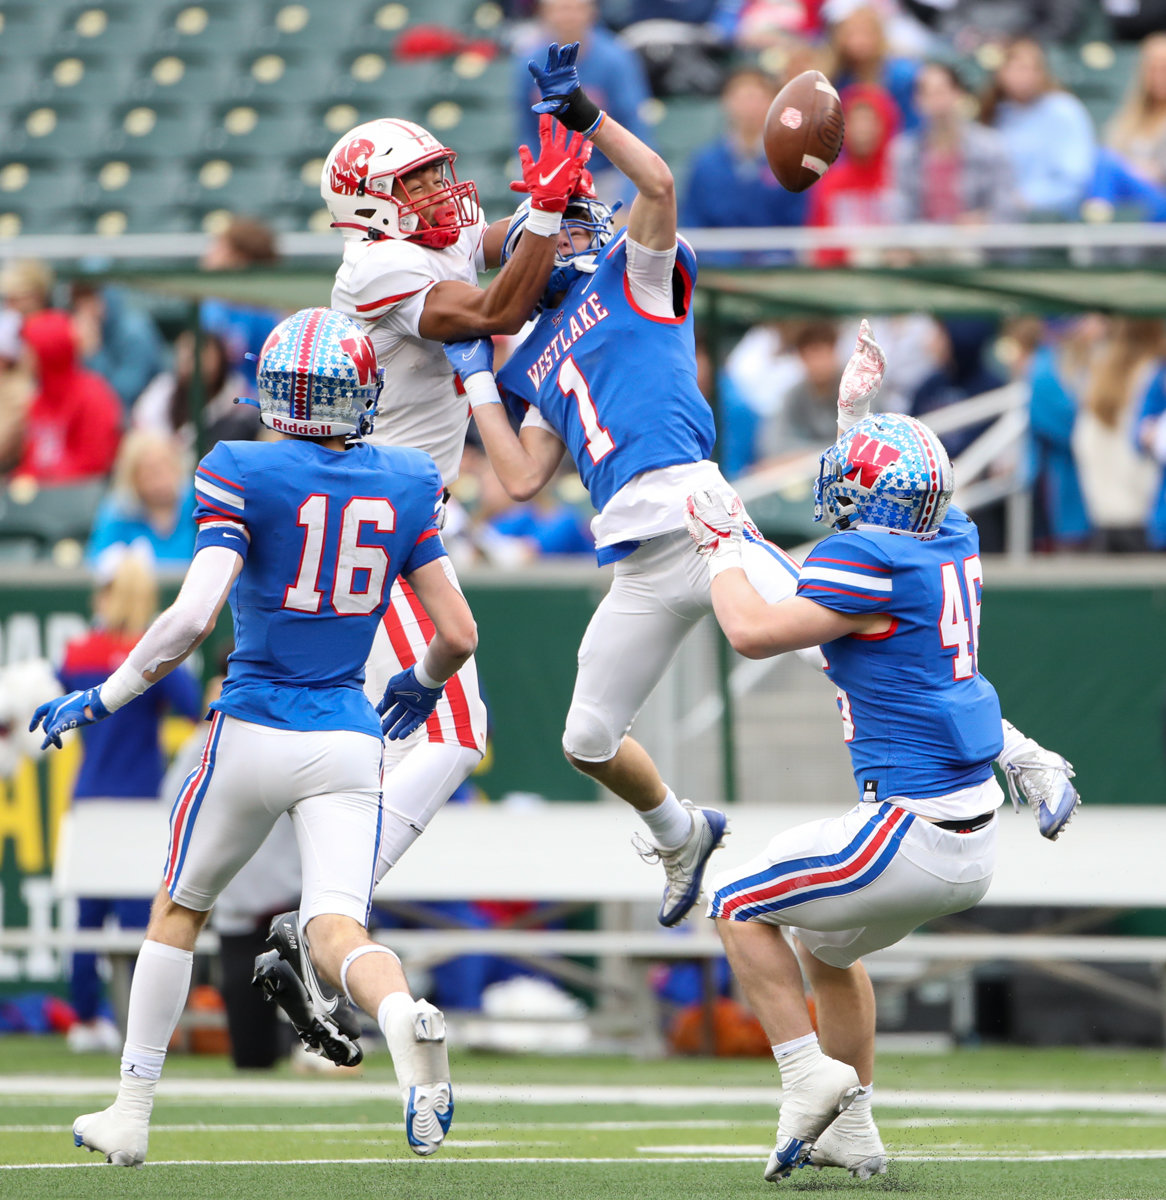 Westlake Chaparrals defensive back Luke Aaron (1) breaks up a pass intended for Katy Tigers wide receiver Nic Anderson (4) during the Class 6A Division II state semifinal  game between Katy and Westlake on December 11, 2021 in Waco, Texas.